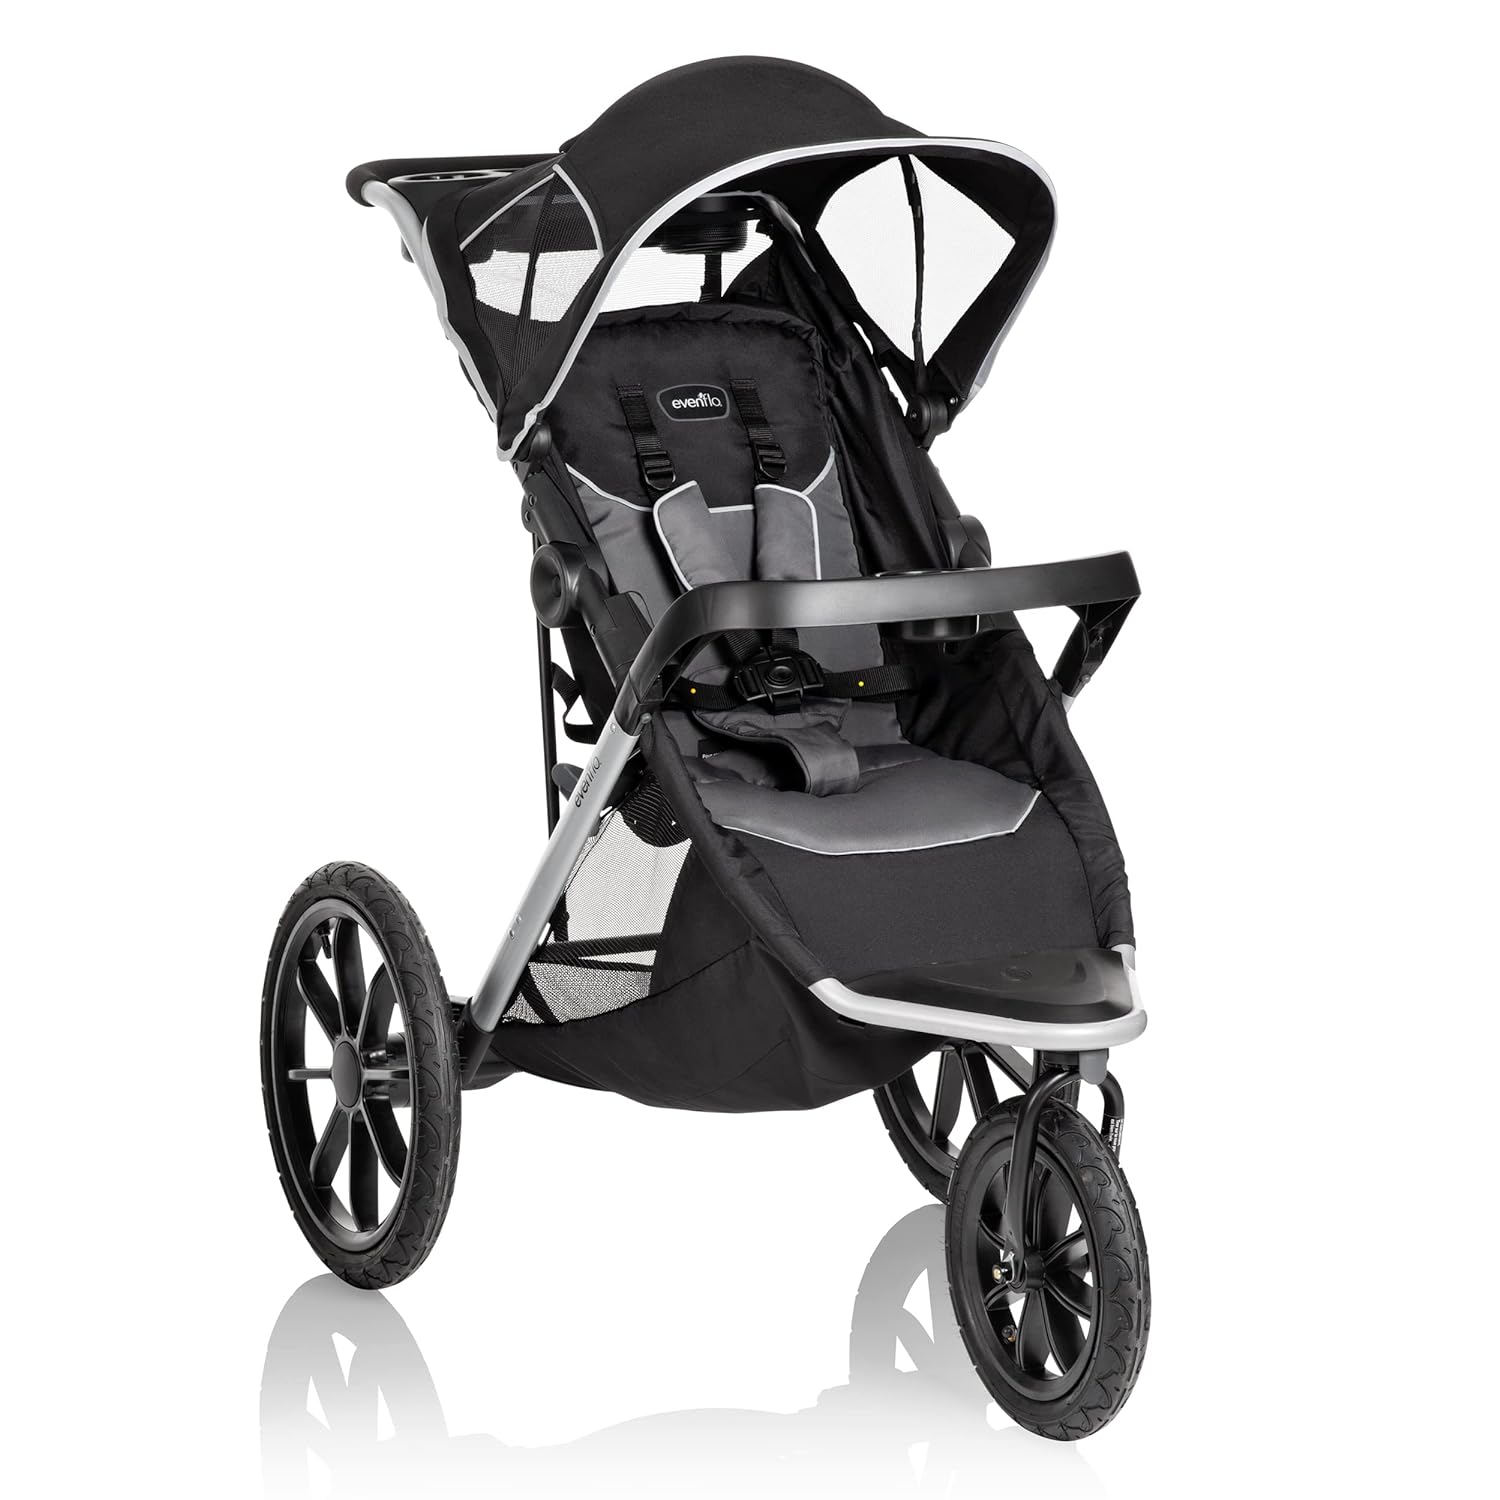 Evenflo Victory Plus Jogger Stroller, Compact, Lightweight, Self-Standing, Ample Storage, Large Tires, Swivel Wheel, Full Coverage Canopy, Multi-Reclining Seat, Compatible With LiteMax Infant Car Seat - image 1 of 11